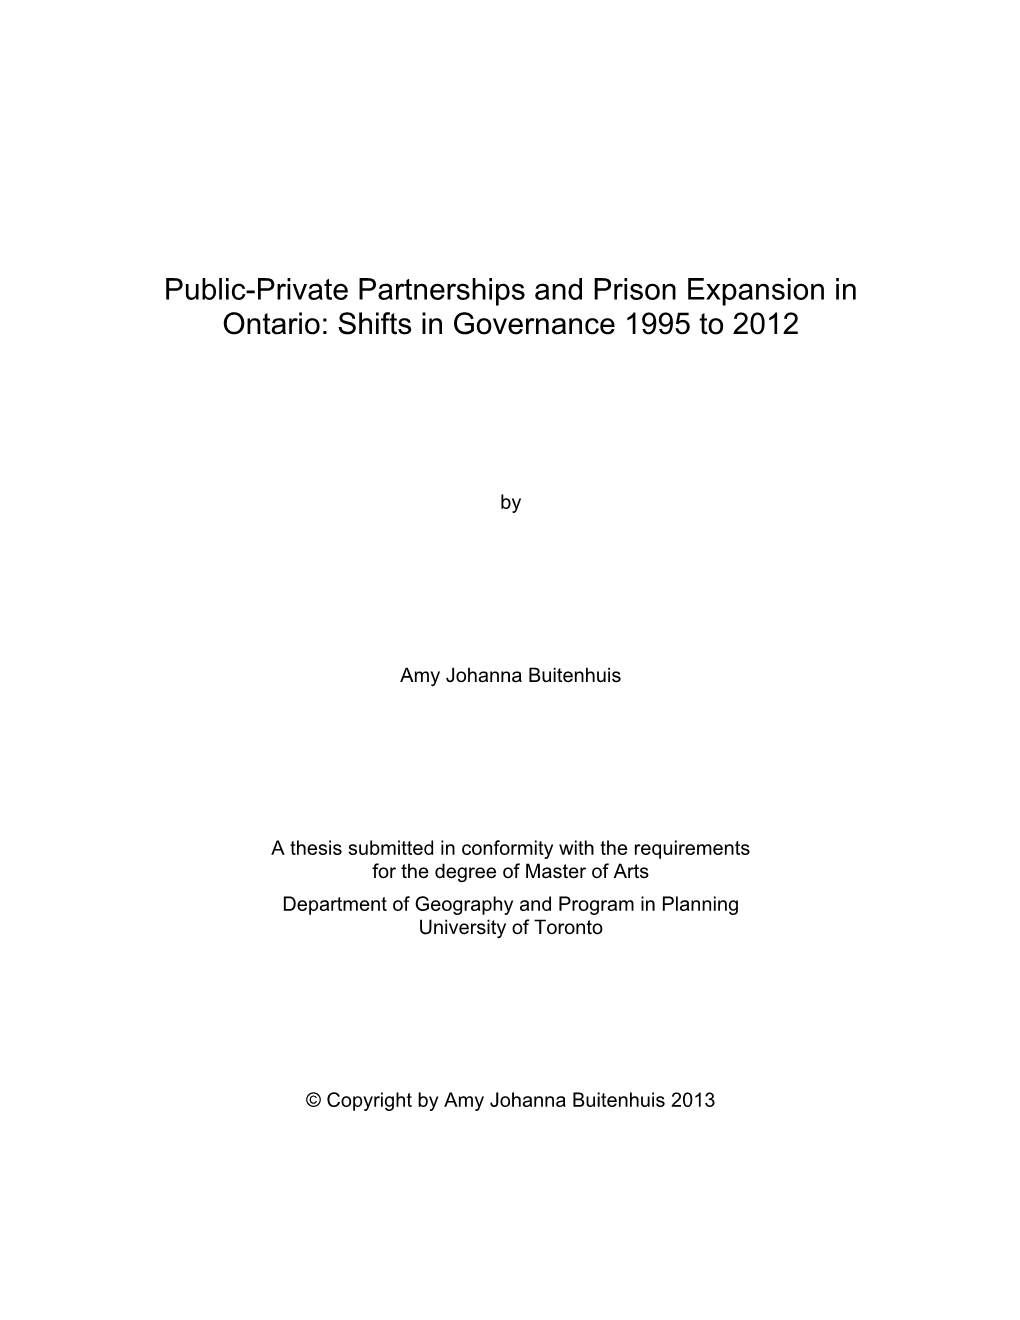 Public-Private Partnerships and Prison Expansion in Ontario: Shifts in Governance 1995 to 2012